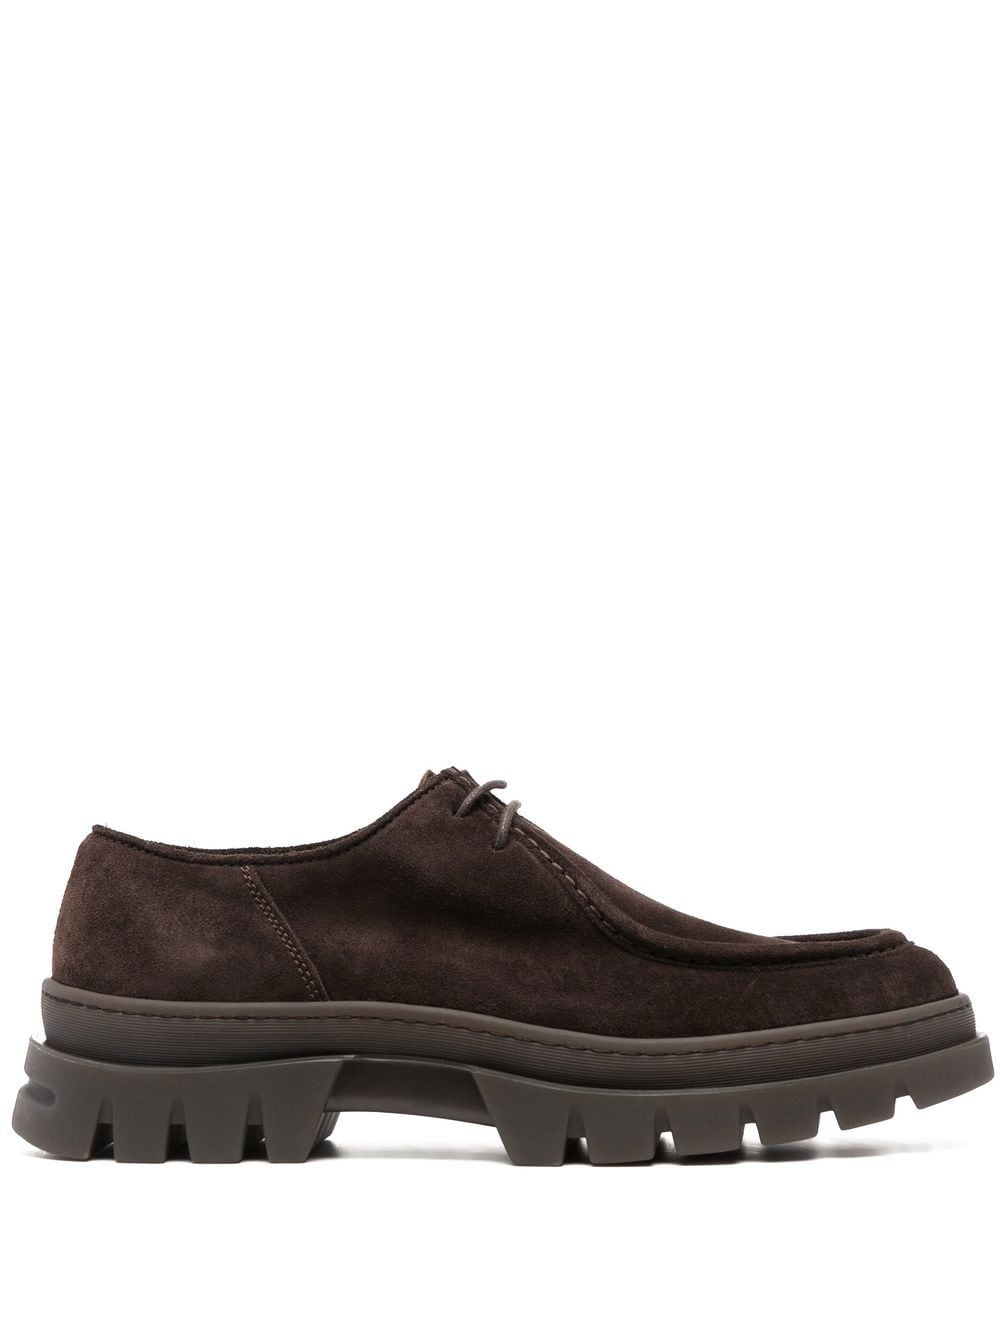 HENDERSON BARACCO LACE-UP SUEDE SHOES